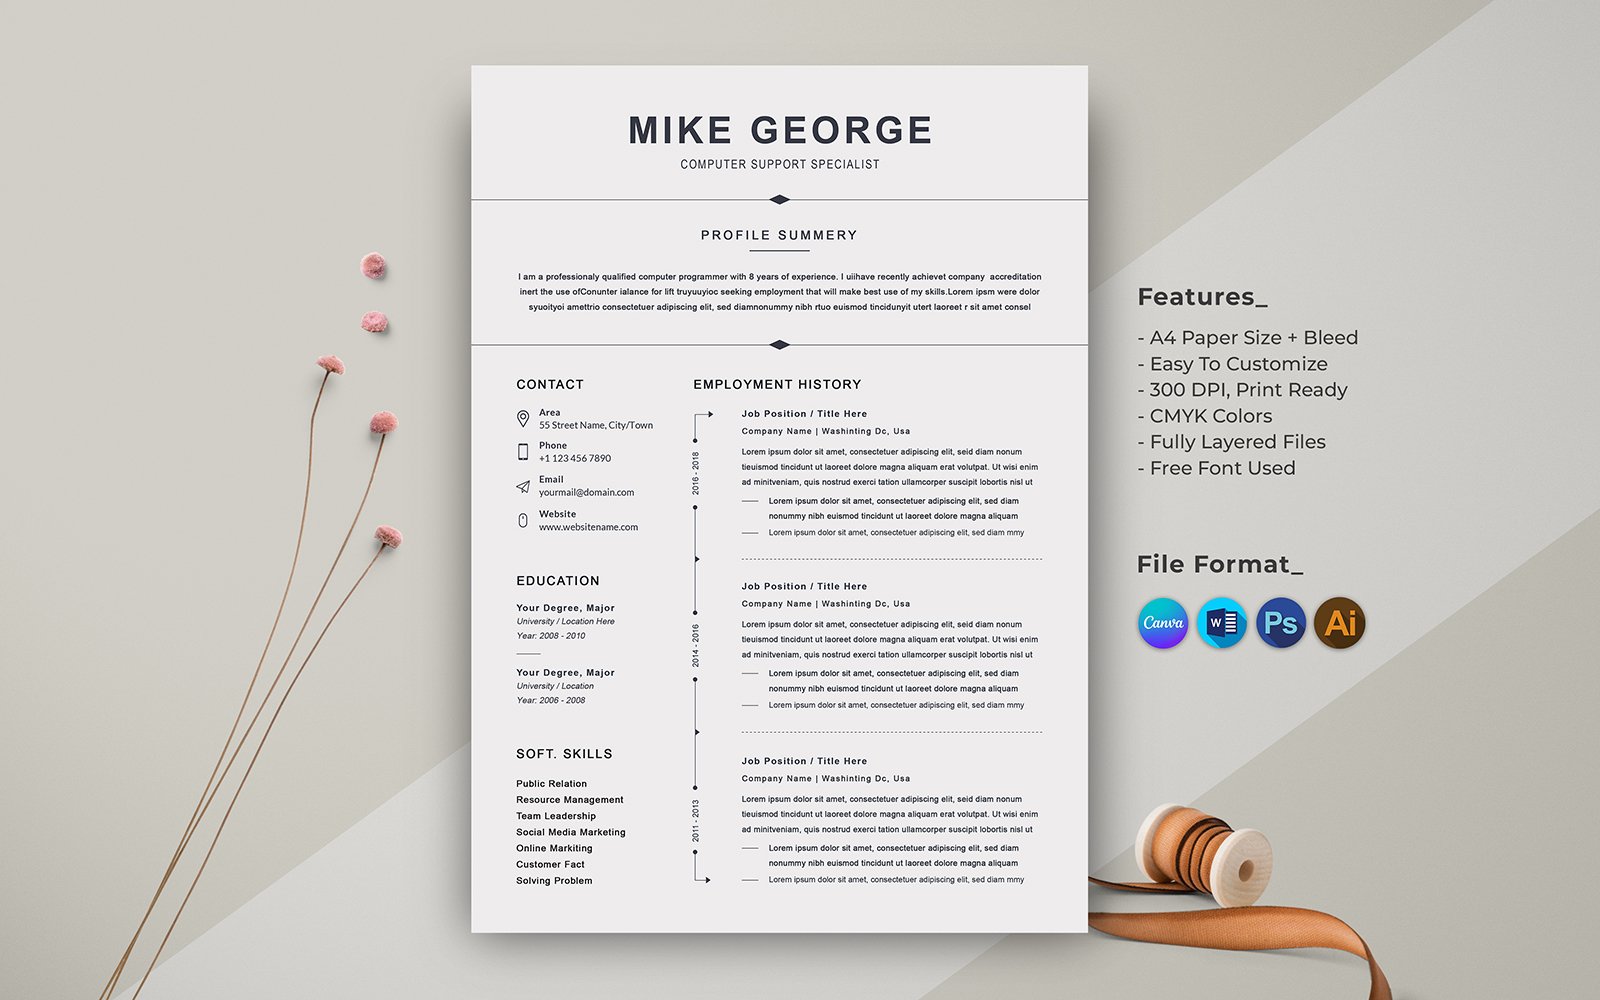 Resume-Mike George Resume Template Canva & Word